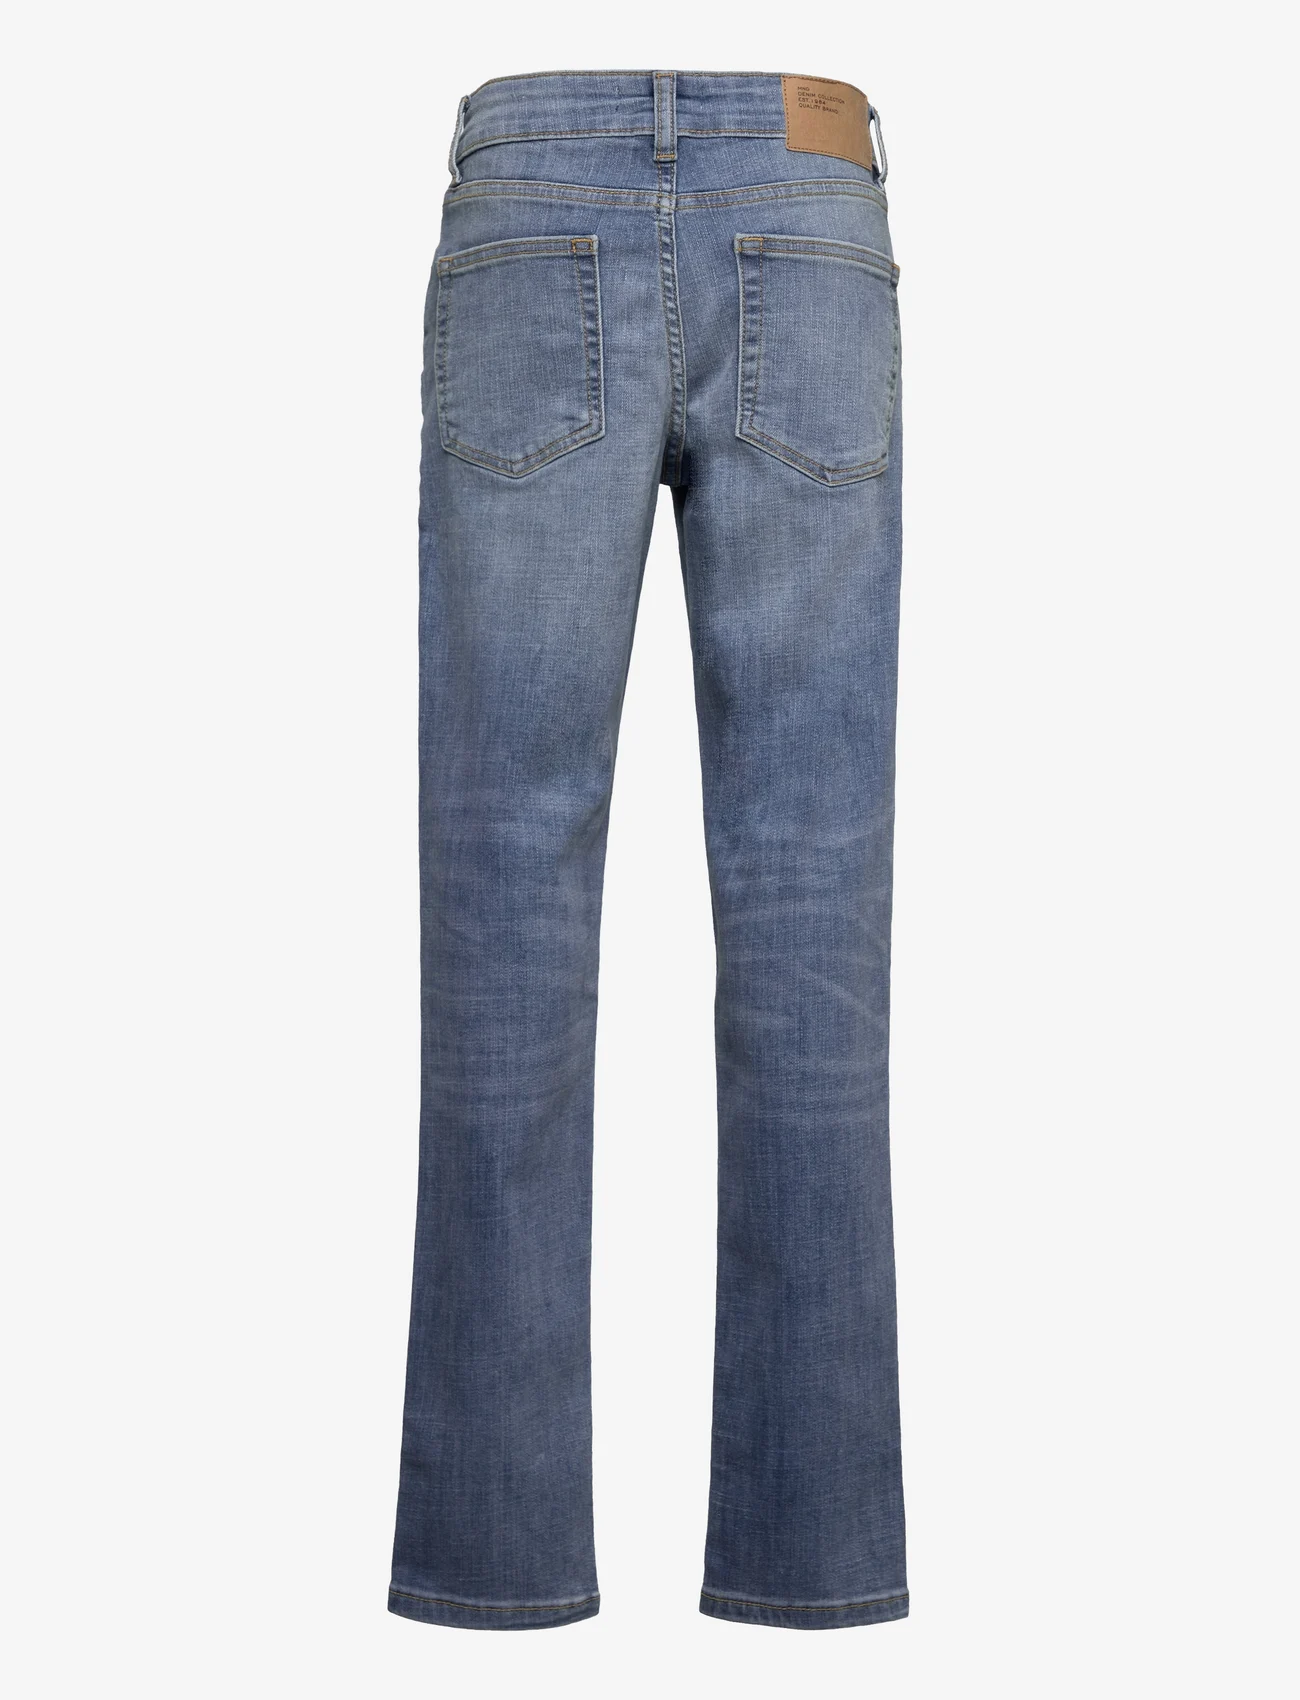 Mango - Slim-fit jeans with buttons - regular jeans - medium blue - 1